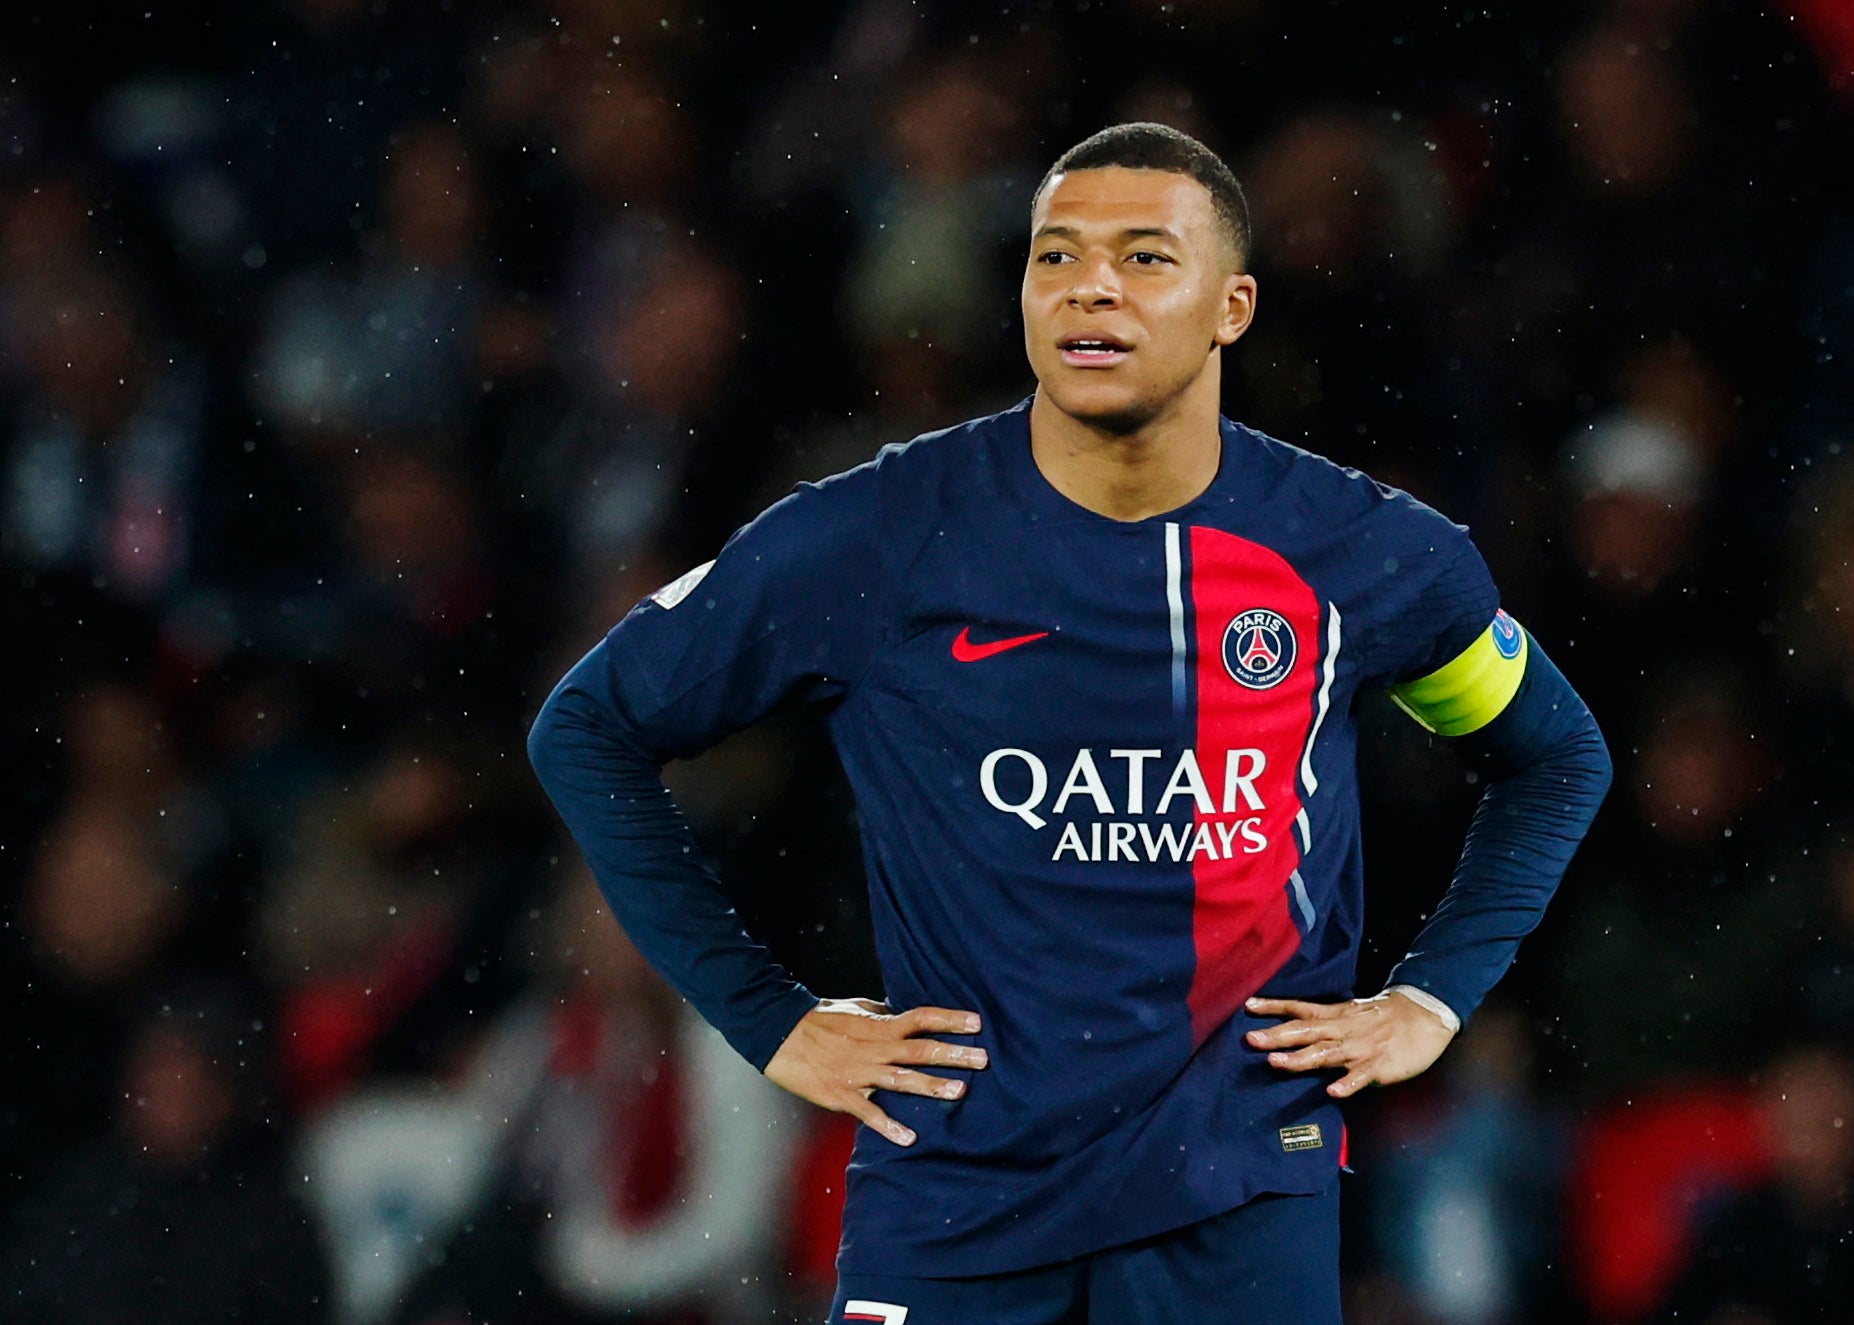 Kylian Mbappe is leaving PSG in the summer after failing to win the Champions League once again.